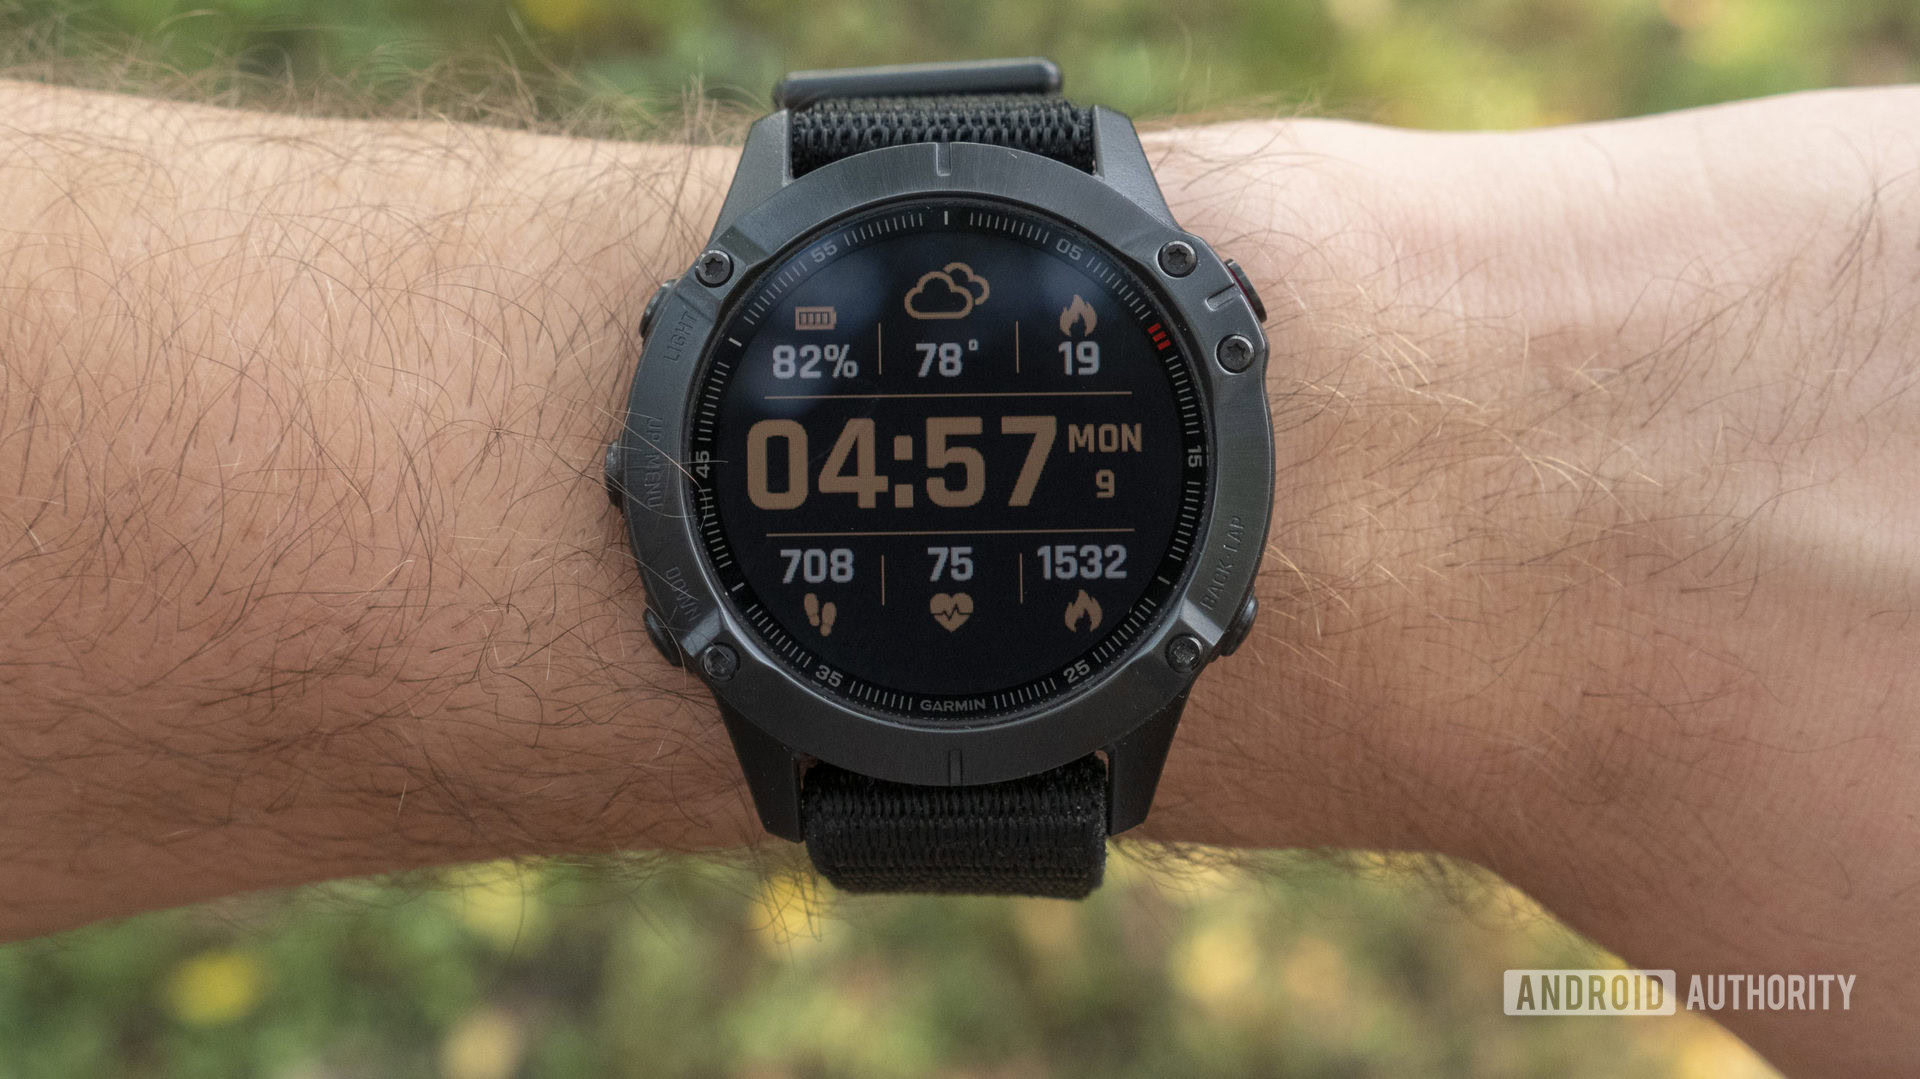 A Garmin Fenix 6 Pro on a user's wrist displays a clock face with the time, temperature, battery, and varied health and activity icons.